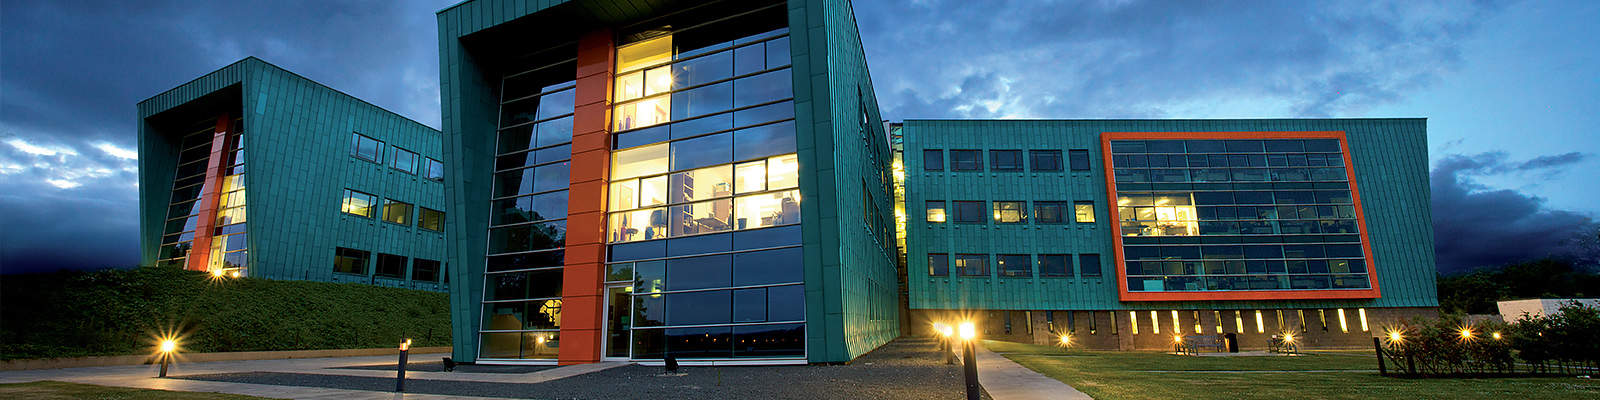 The Infolab21 building at night